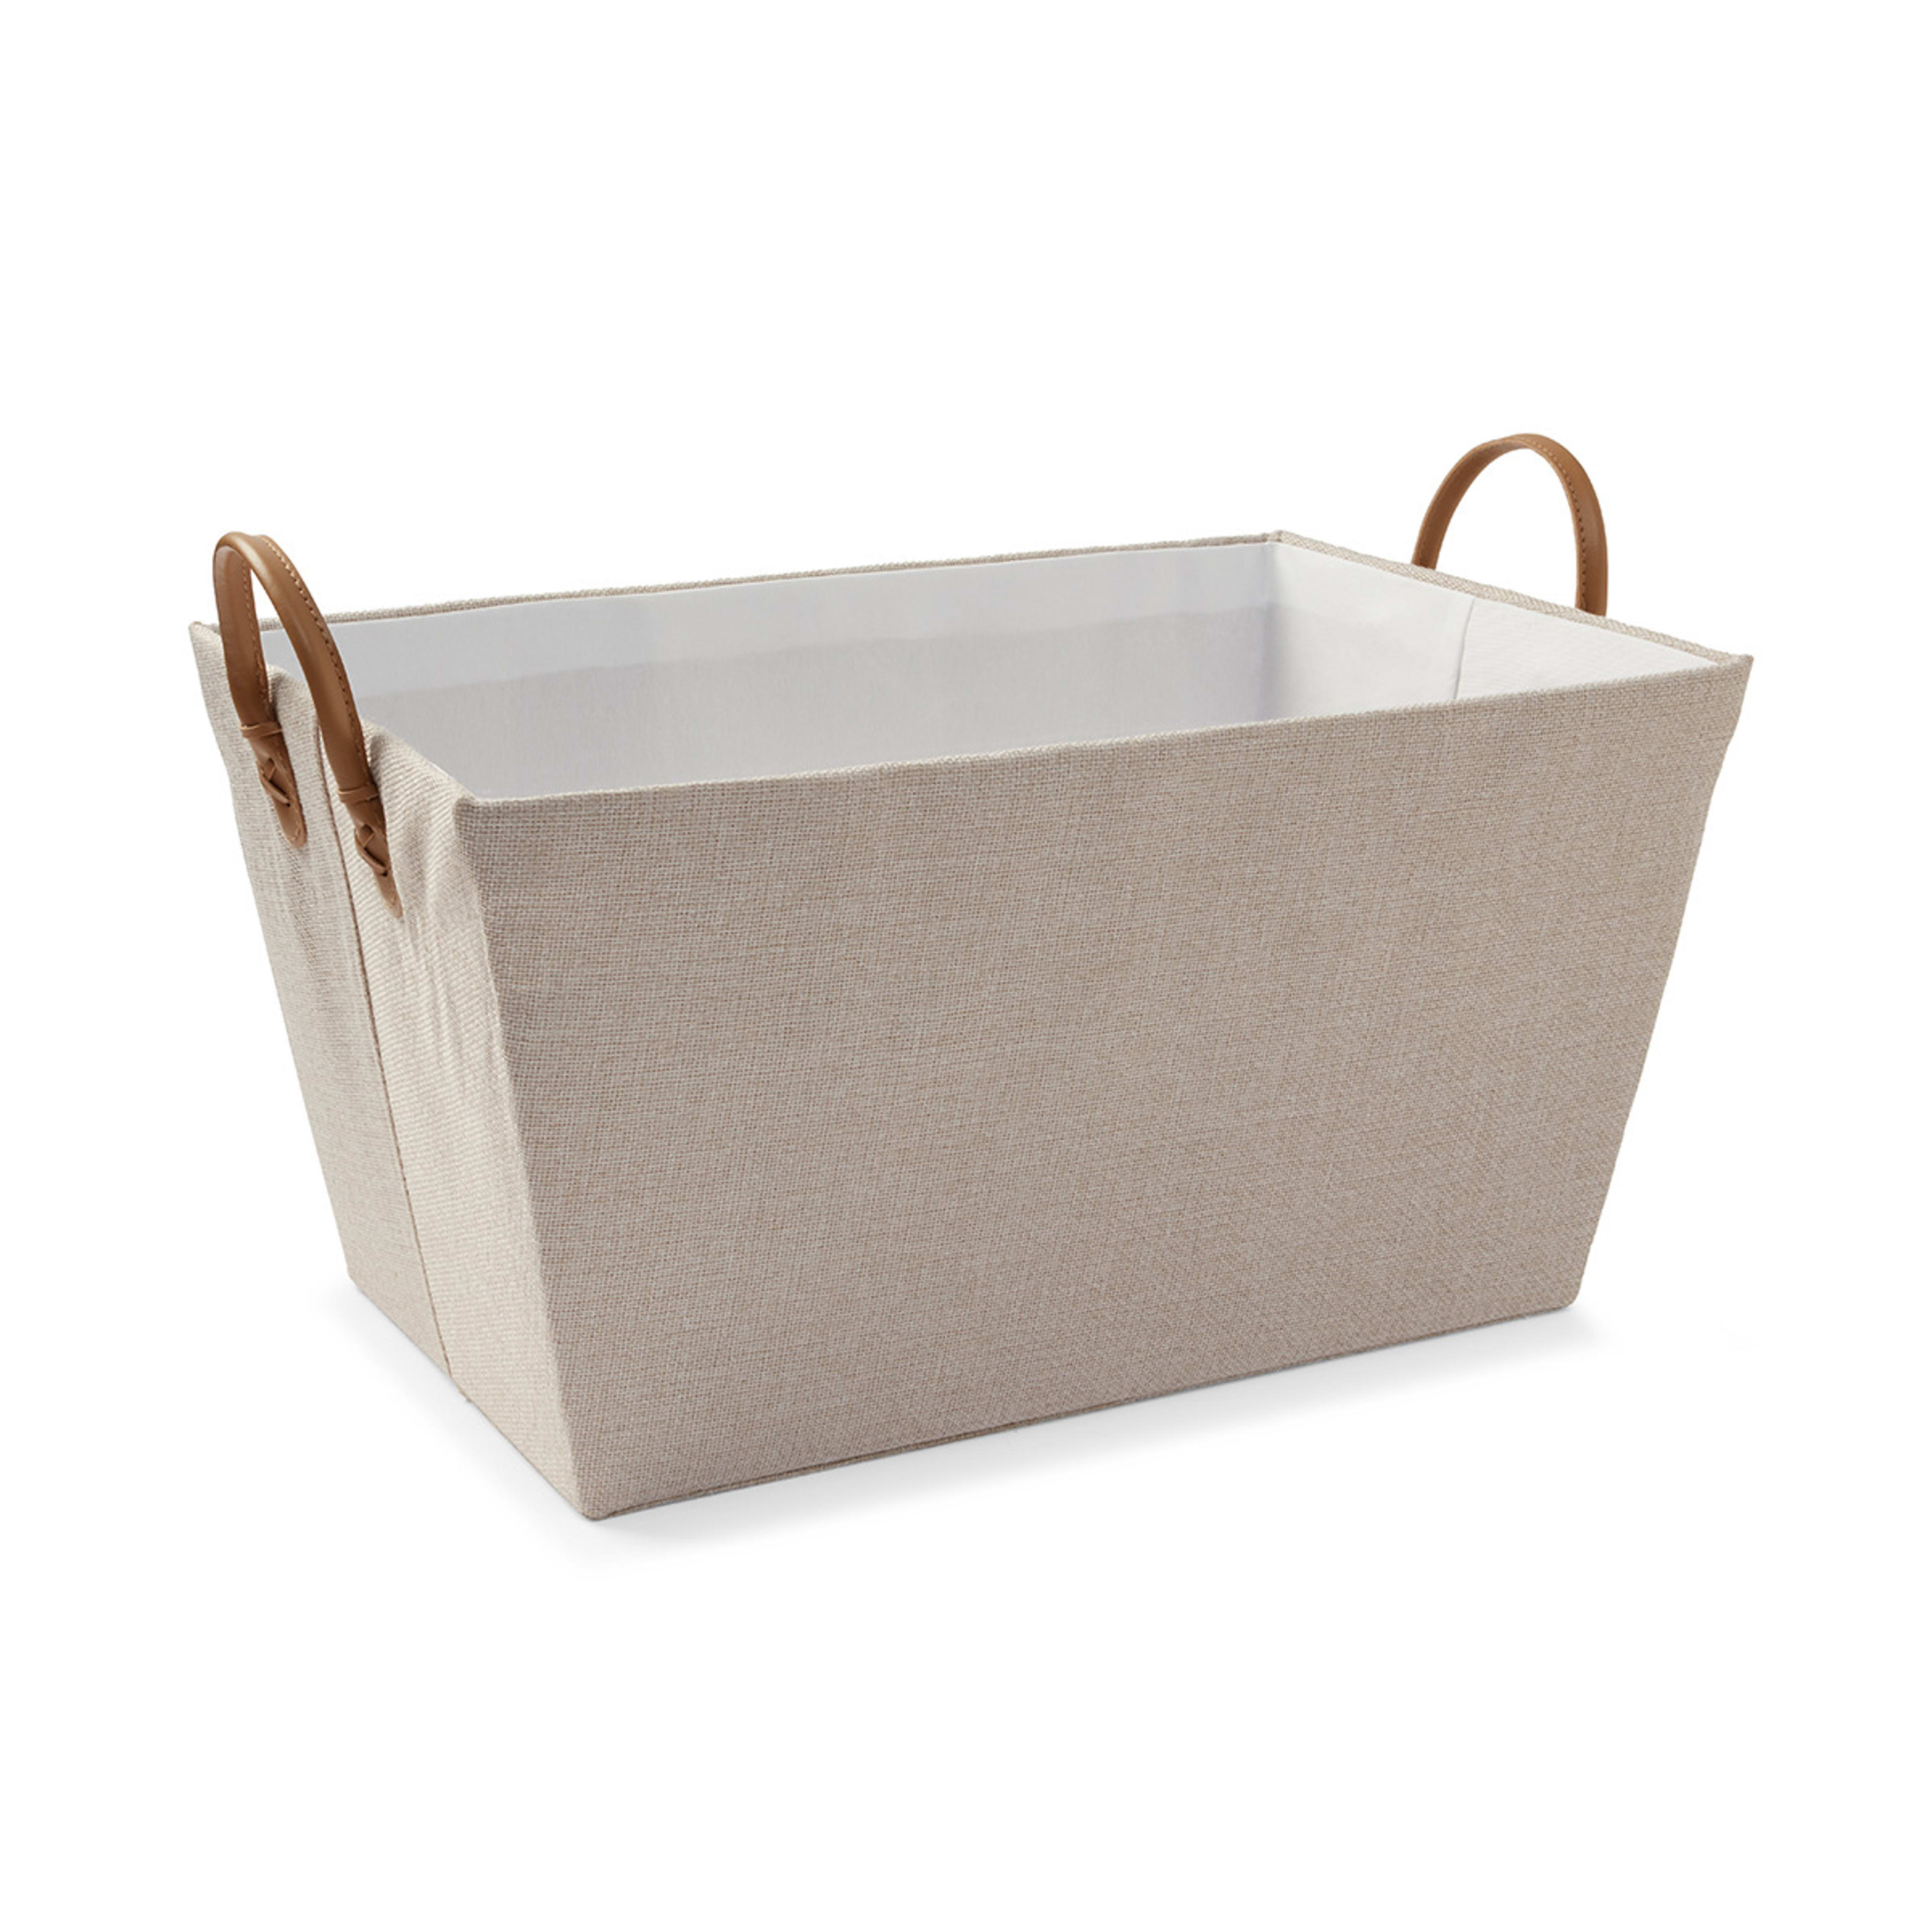 Linen Look Tapered Rectangle Basket - White and Beige - Kmart